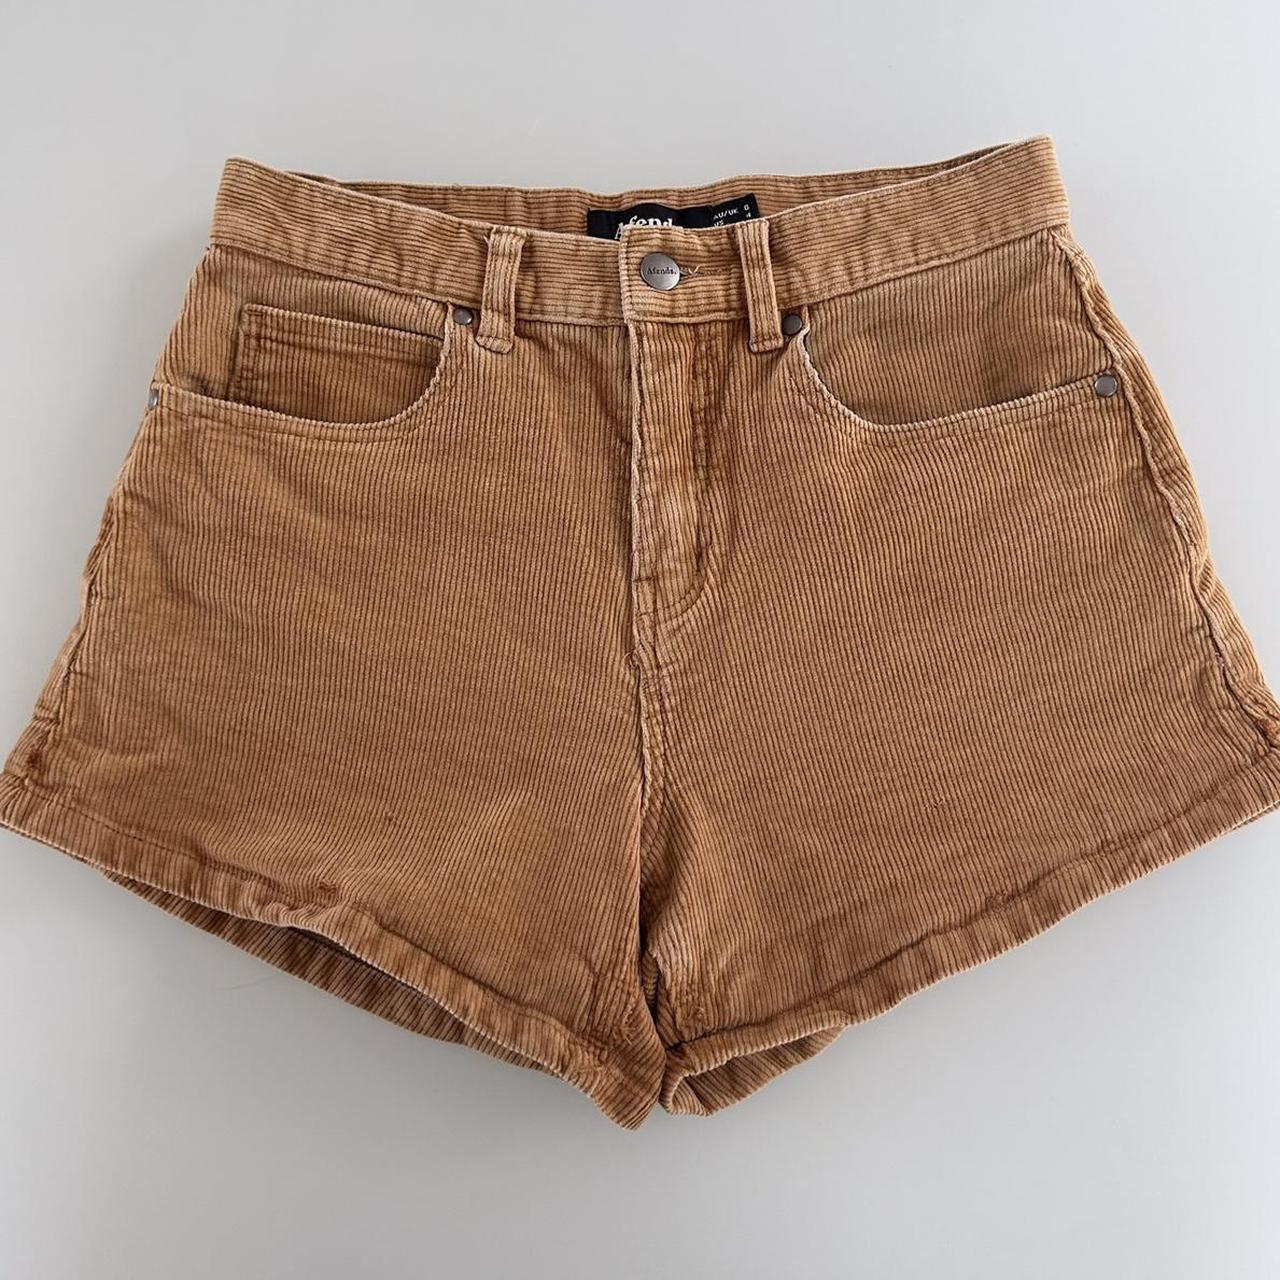 Afends Women's Orange and Tan Shorts (2)